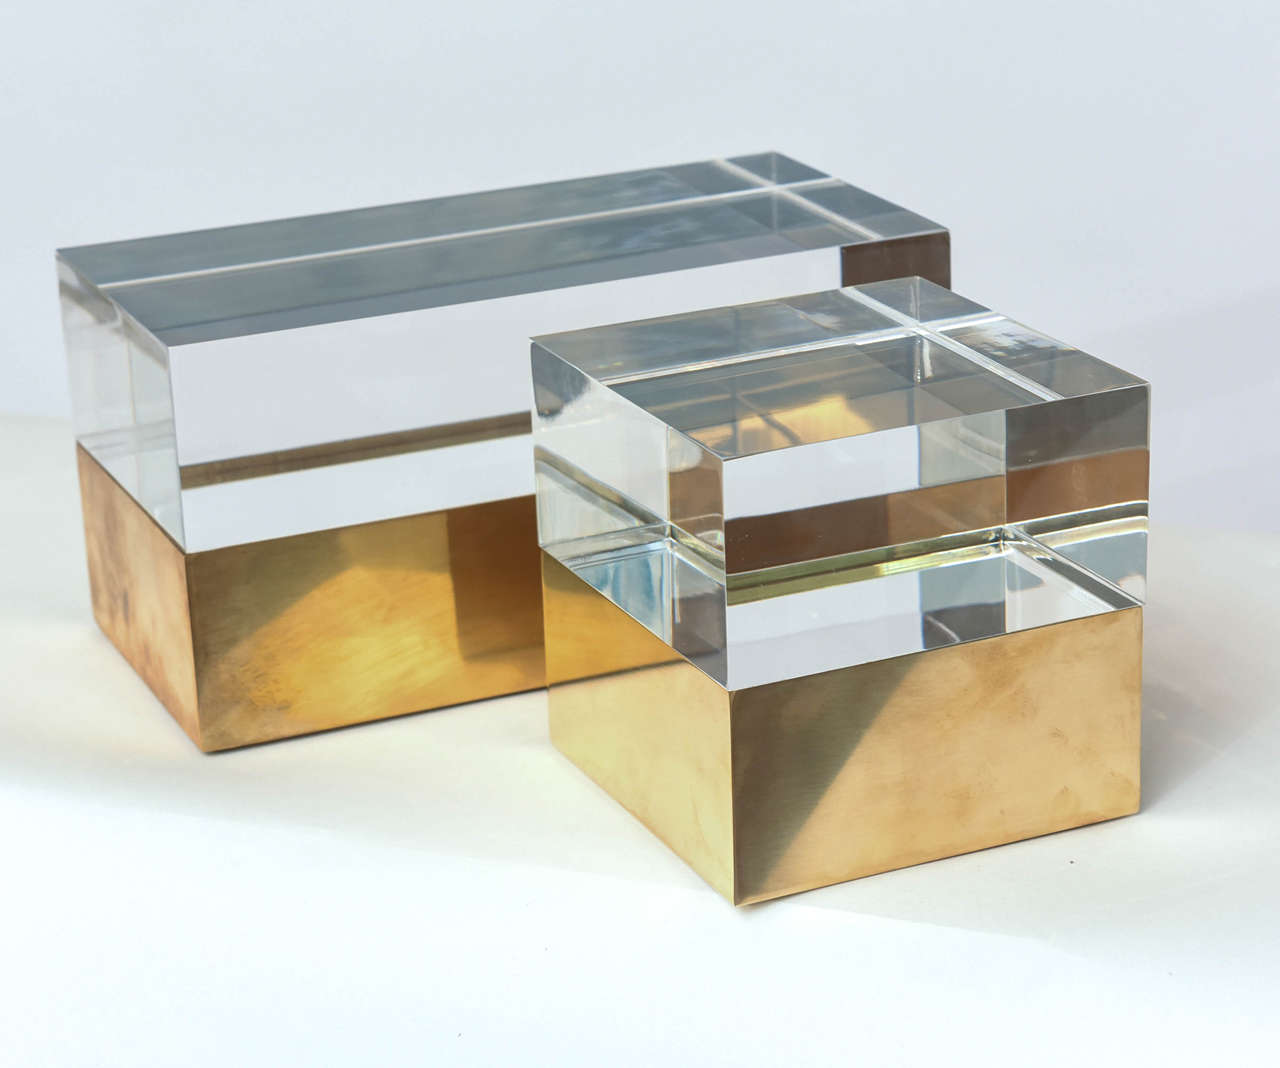 Beautiful acrylic and brass boxes.
designed by Michael Dawkins.
100% made in Italy.
Price is for the rectangular version.
Square box sold separately.